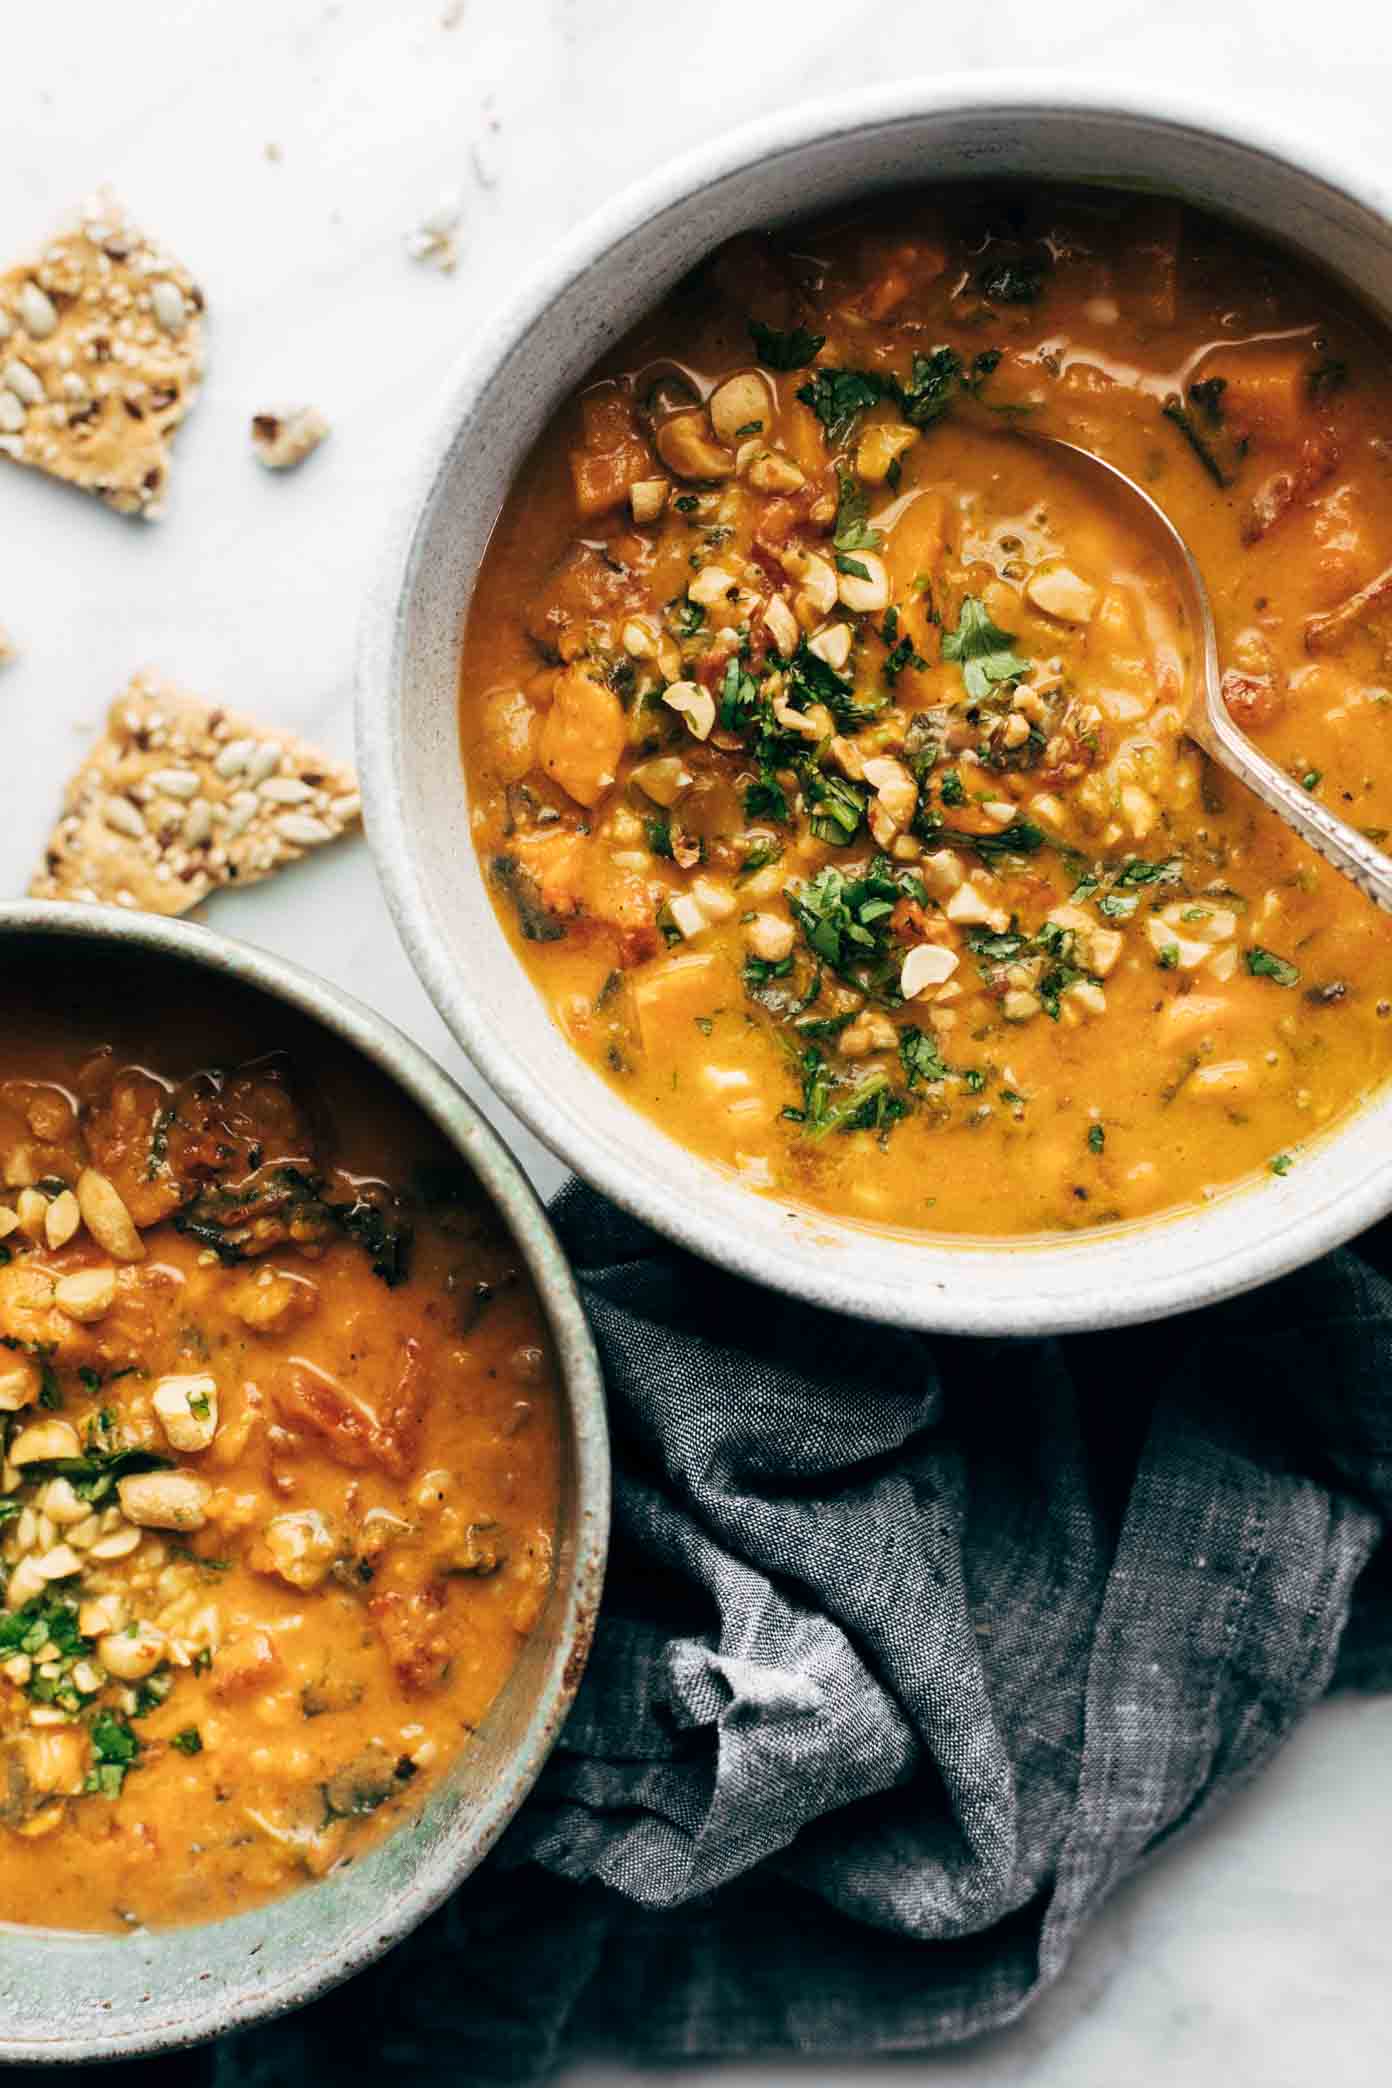 African-inspired crockpot soup with peanut butter, chili peppers, brown rice and lentils